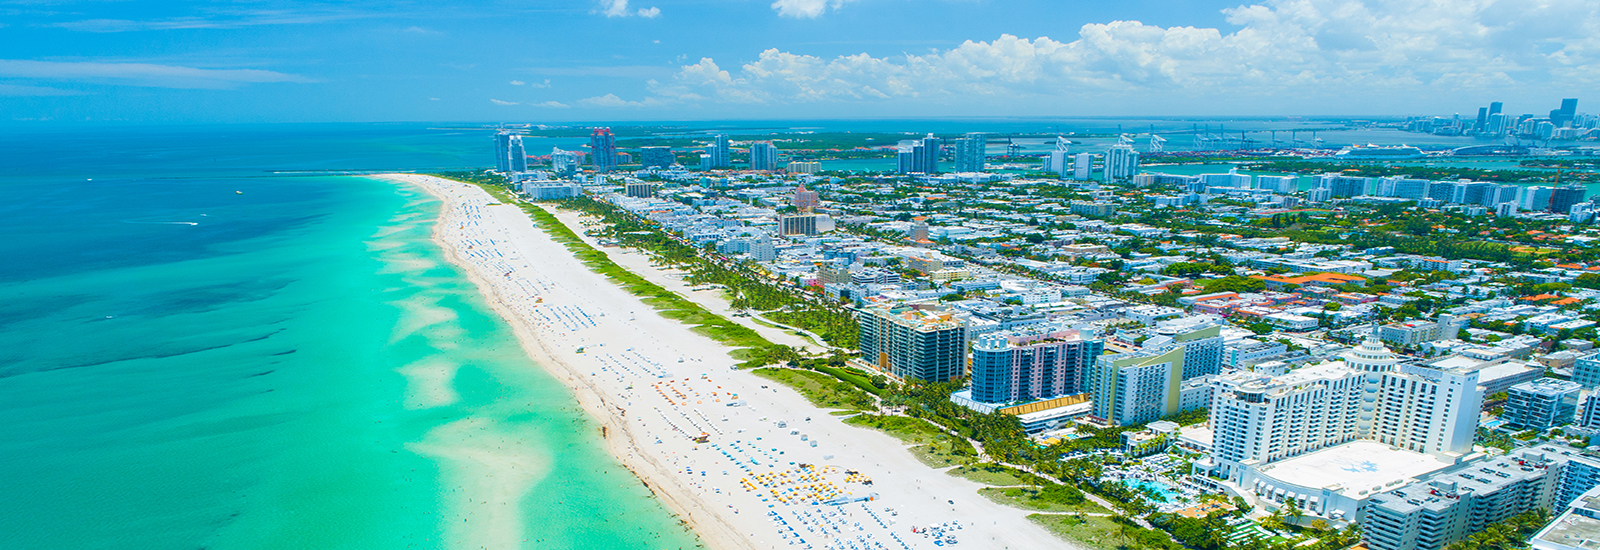 This is a stock photo. An aerial view of Miami Beach in Miami, Florida.